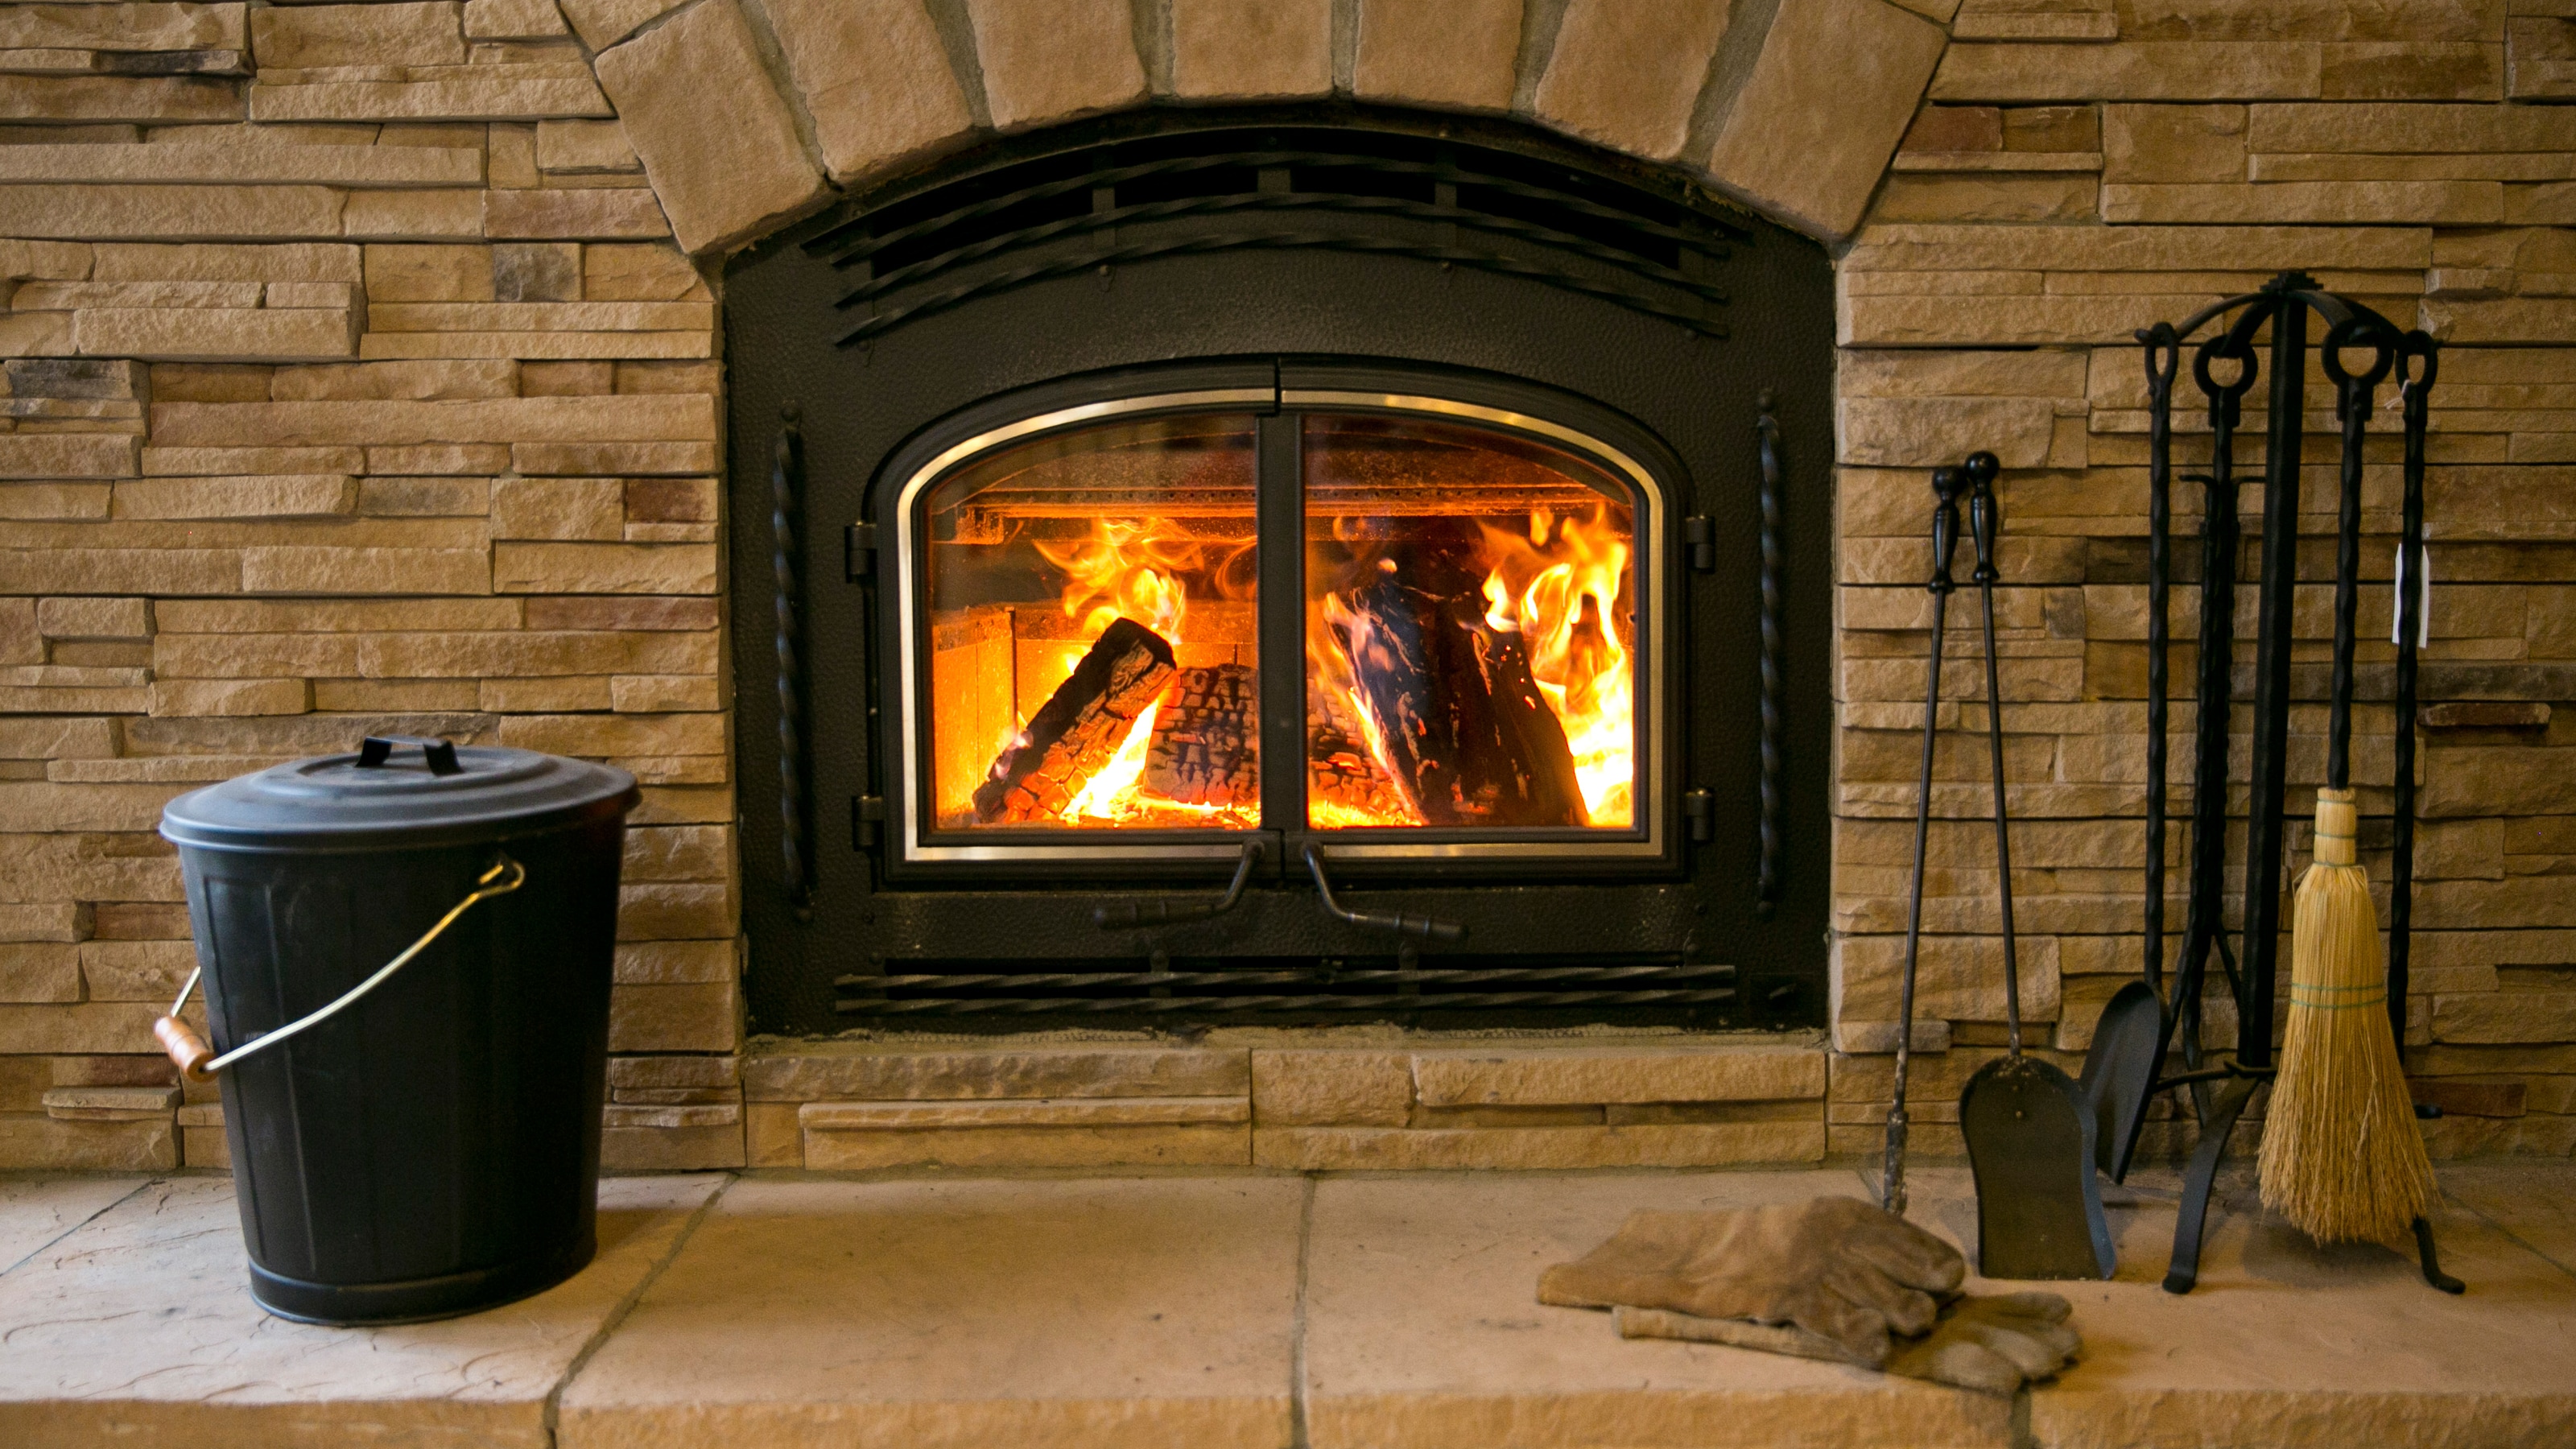 Indoor Gas Fireplace Insert New How to Convert A Gas Fireplace to Wood Burning